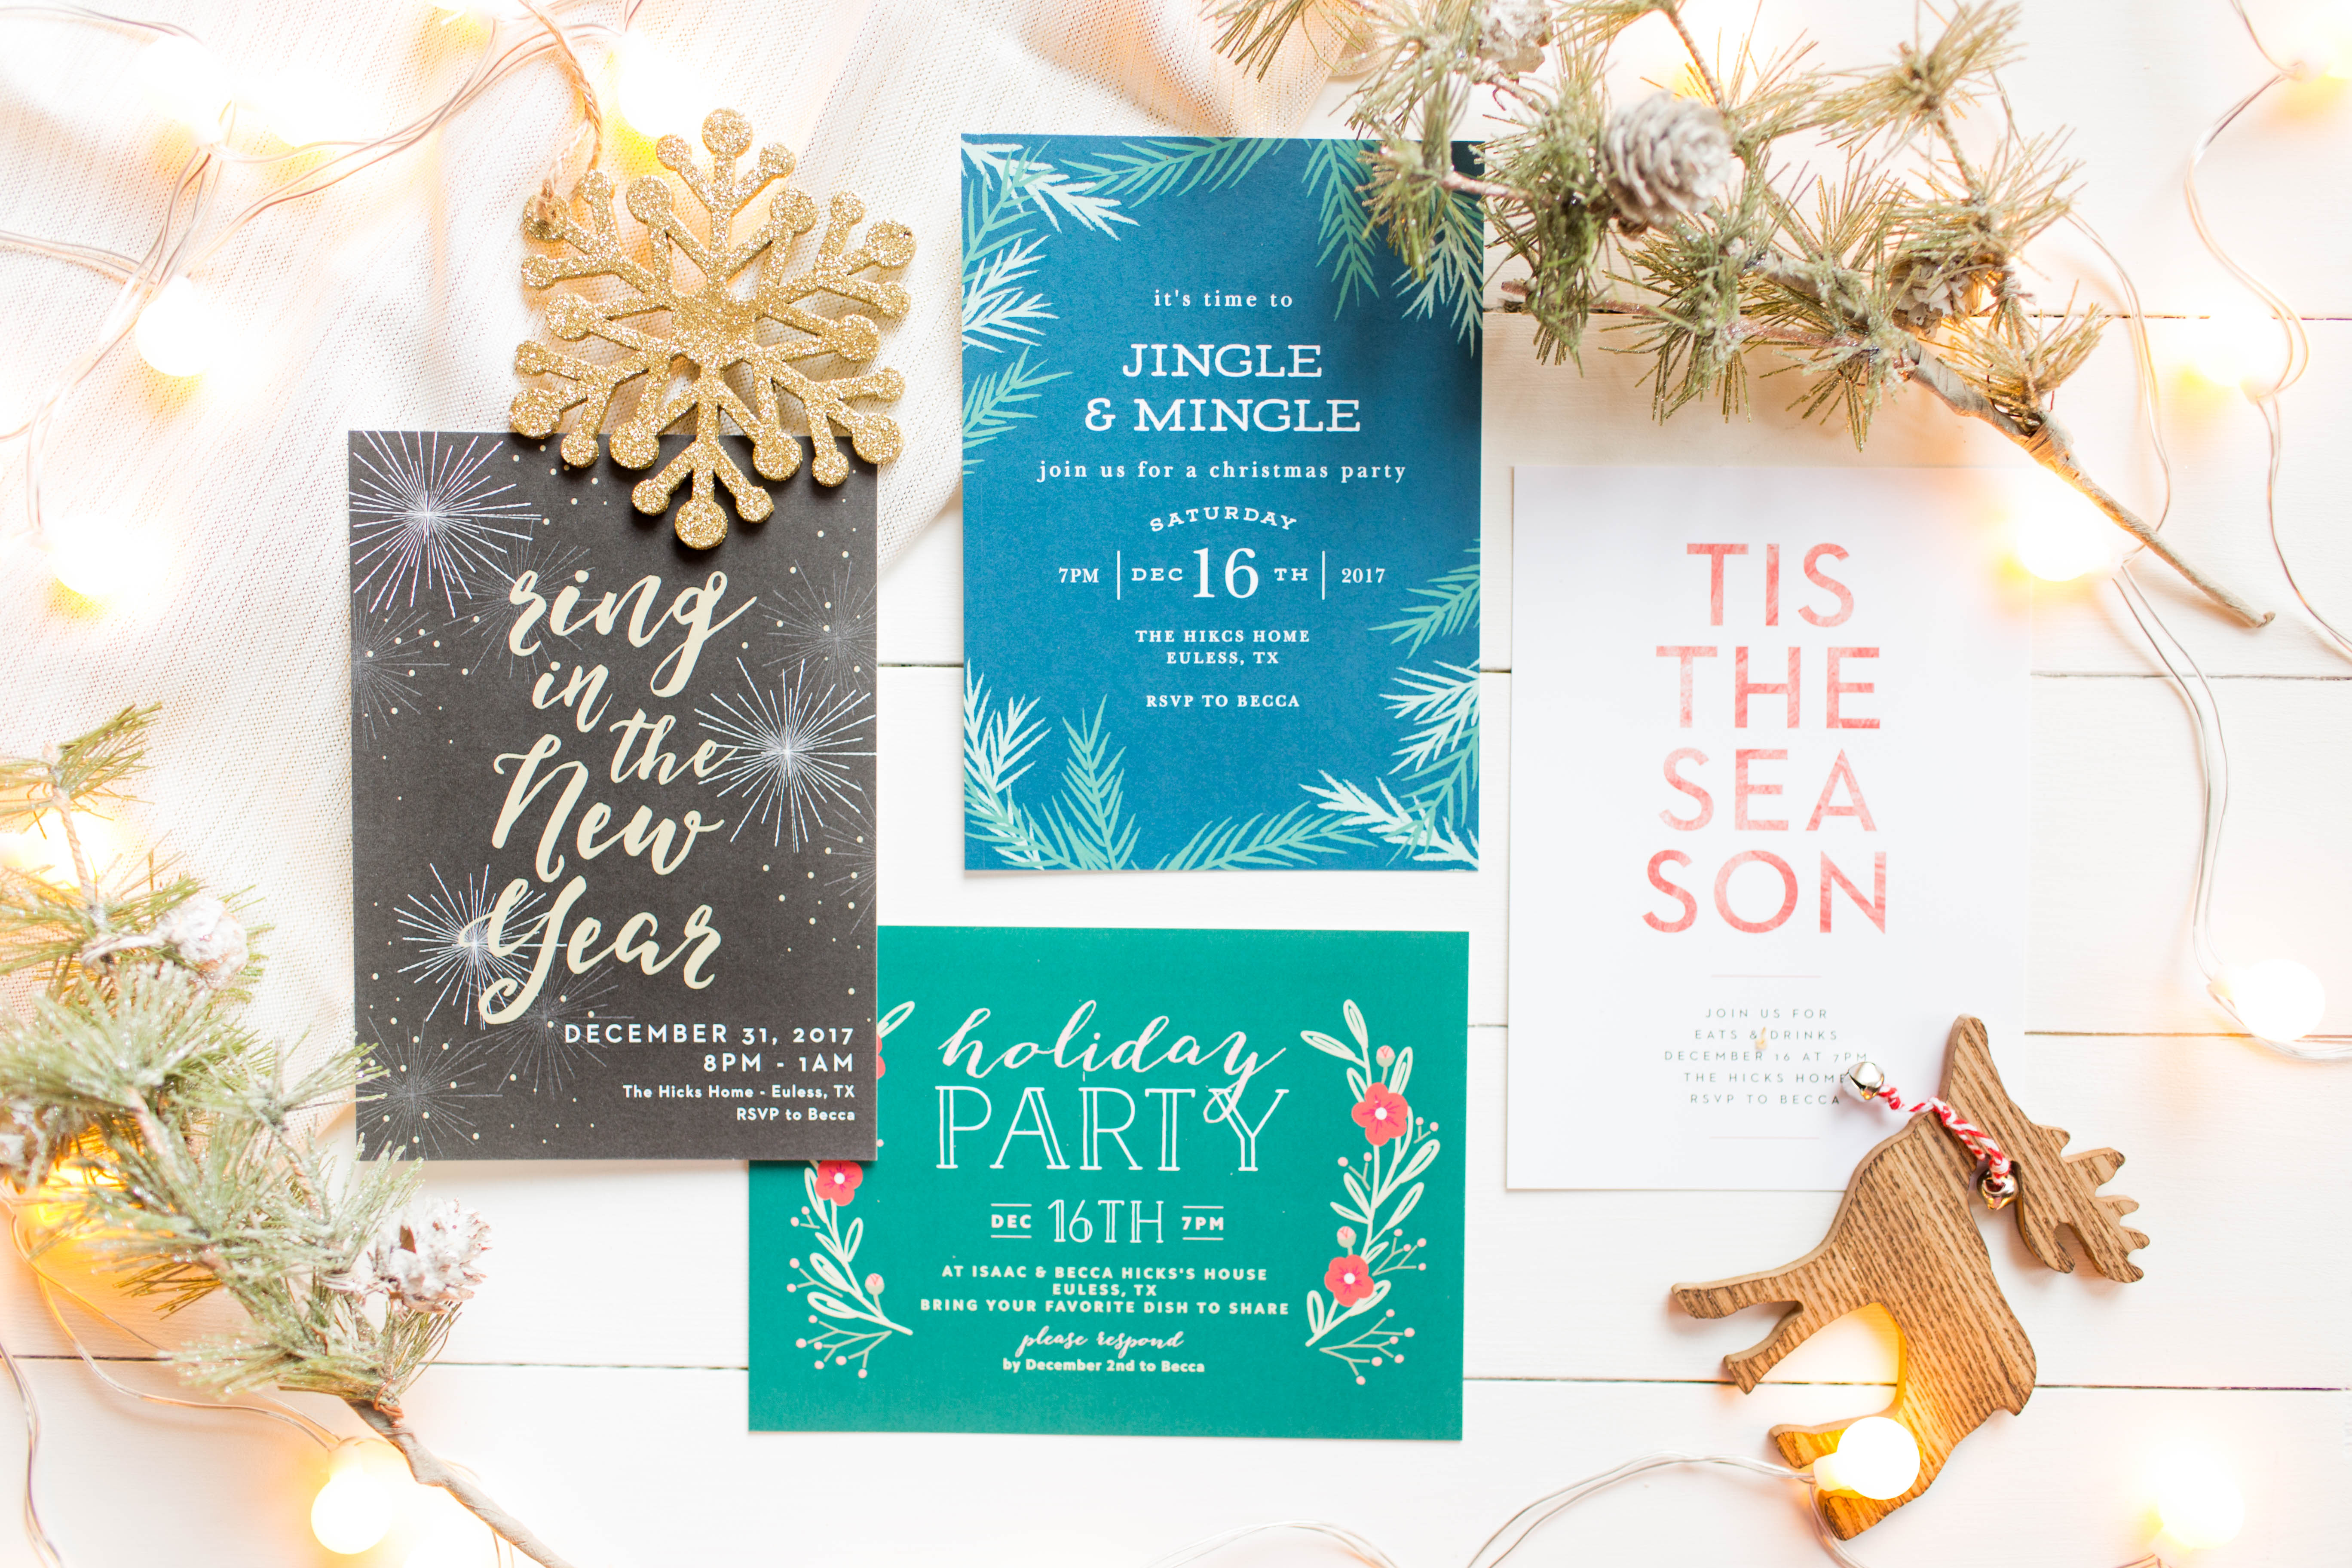 Make your holidays a little easier with Basic Invite! Beautiful Christmas cards and holiday invitations for all people. | read more at happilythehicks.com #ad #basicinvite